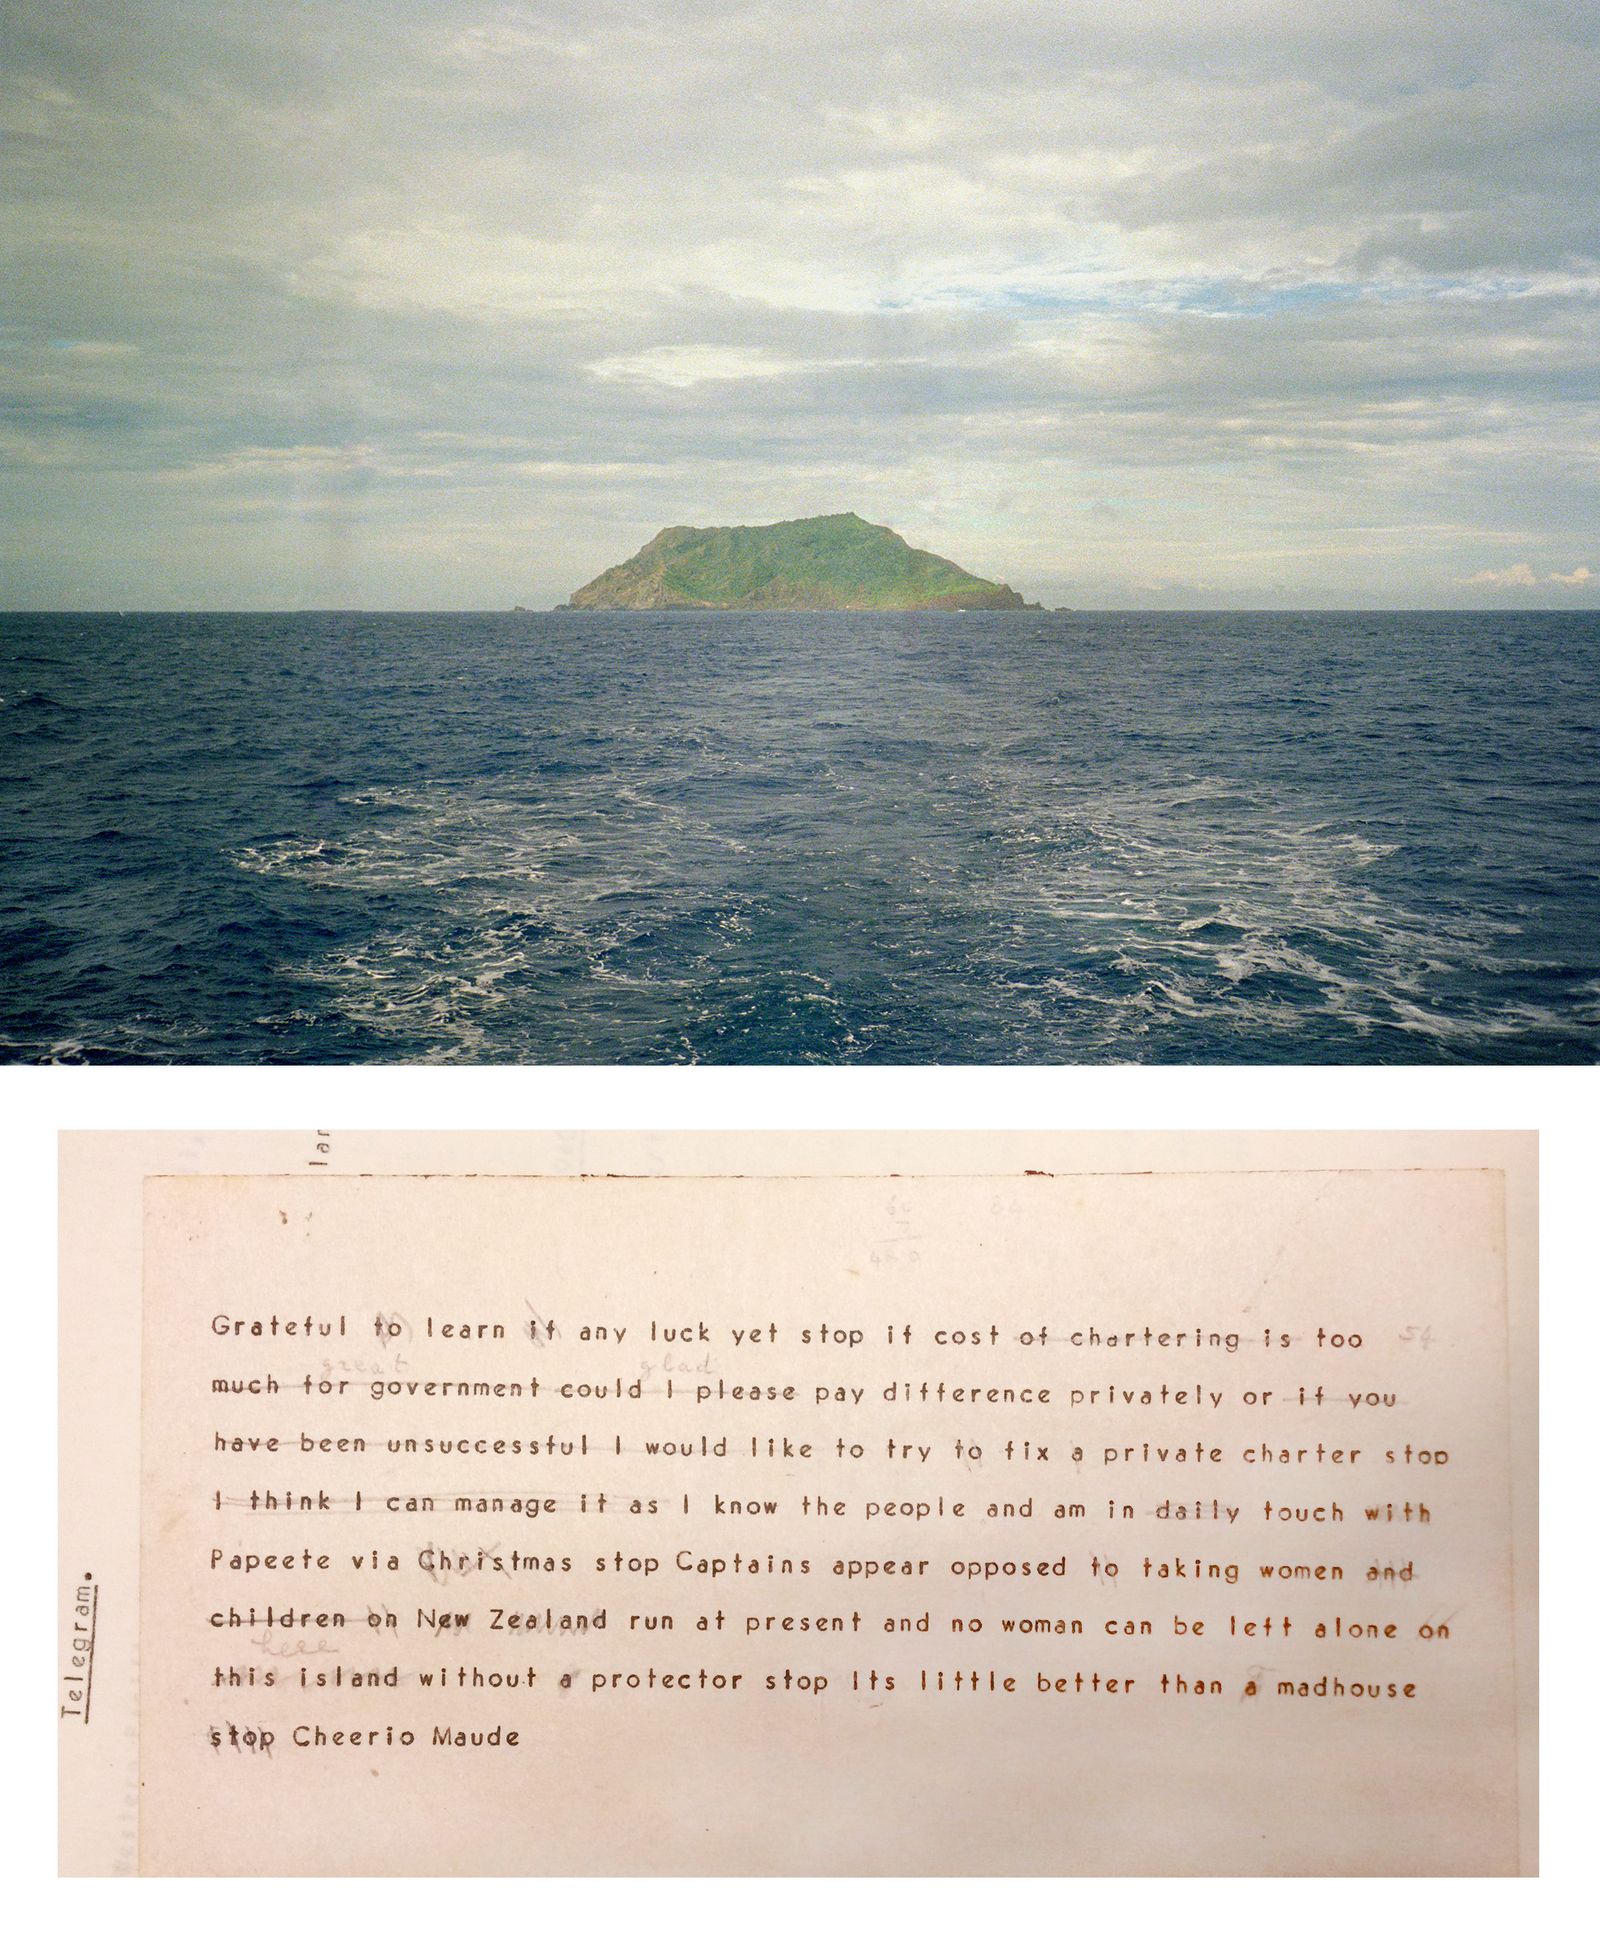 © Rhiannon Adam - Image from the Big Fence / Pitcairn Island photography project